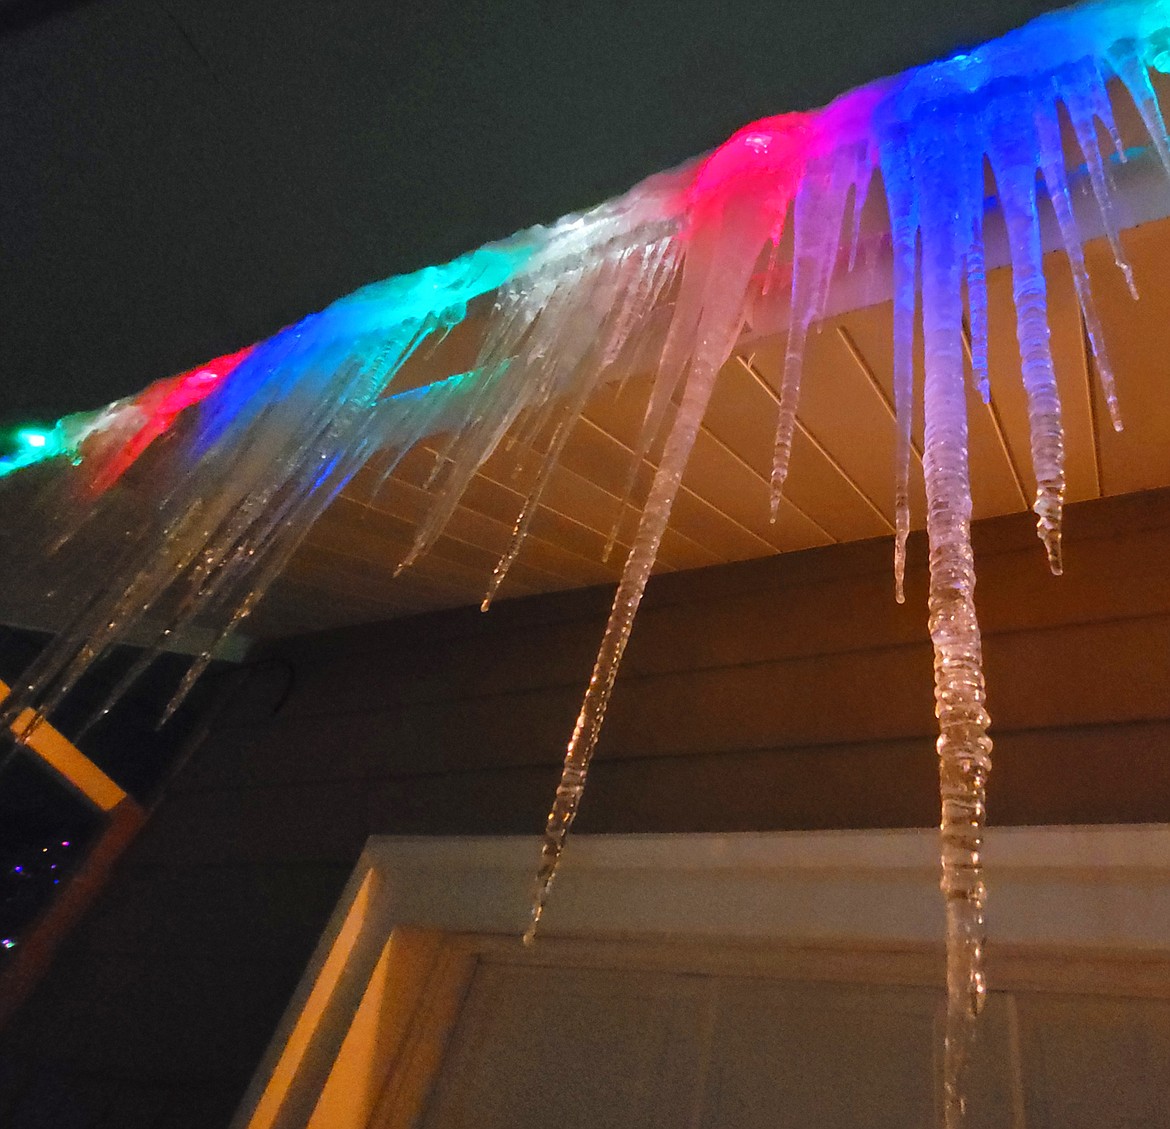 DEVIN WEEKS/Press
Lights glow through long icicles hanging from a roof on 19th Street in Coeur d'Alene on Wednesday night.